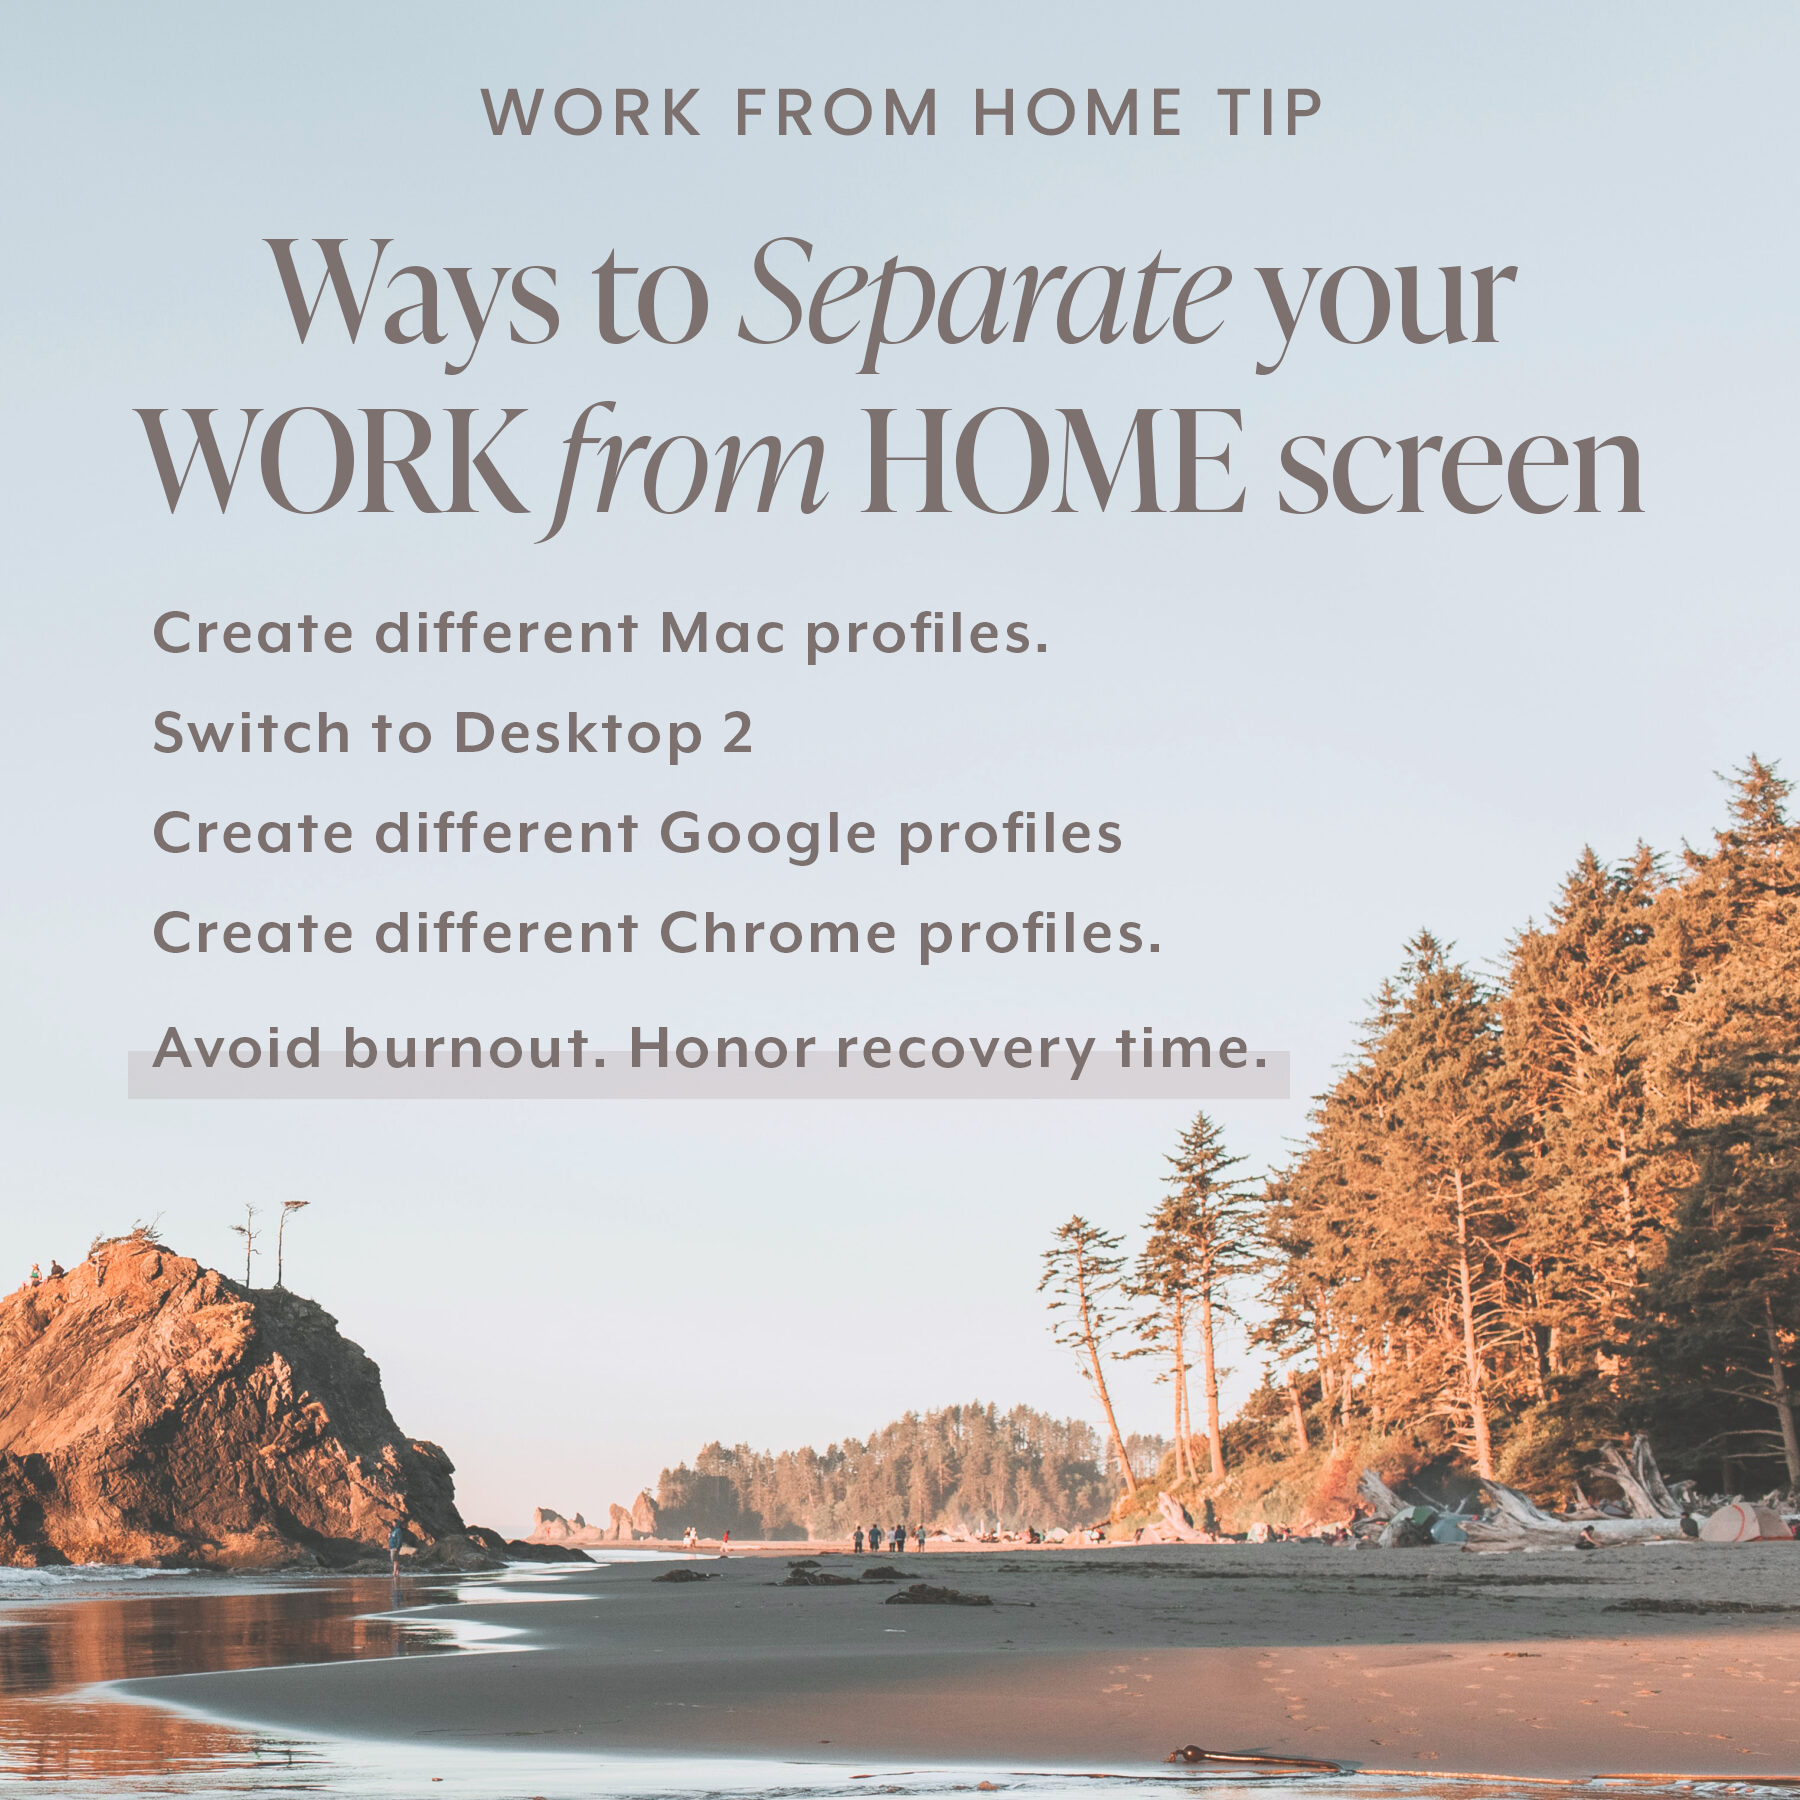 Ways to separate your work from personal computer screen if you work from home.